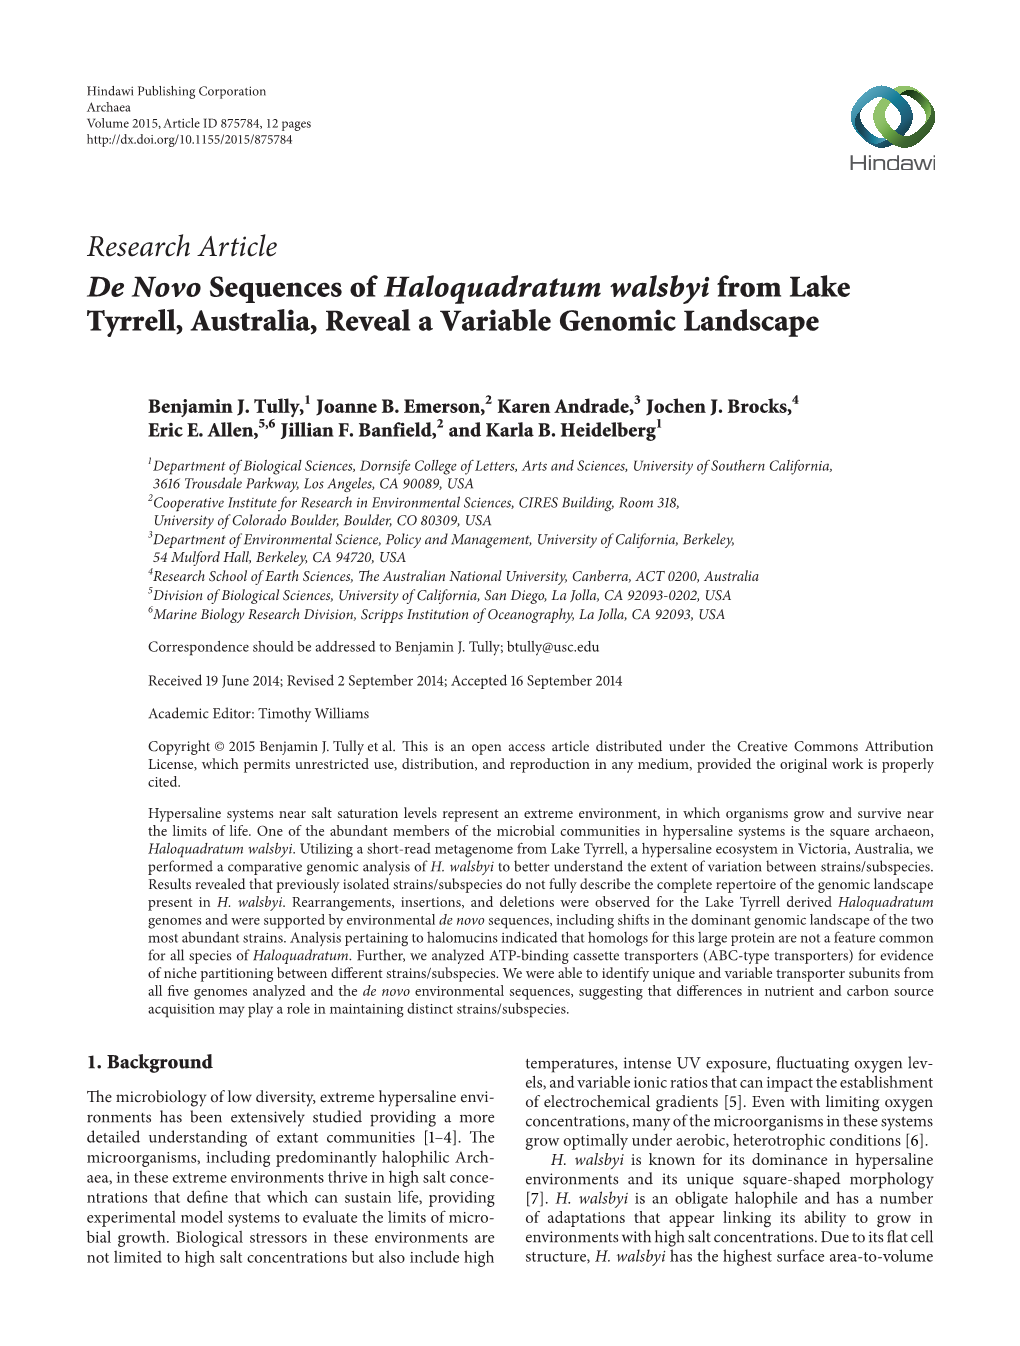 Research Article De Novo Sequences of Haloquadratum Walsbyi from Lake Tyrrell, Australia, Reveal a Variable Genomic Landscape